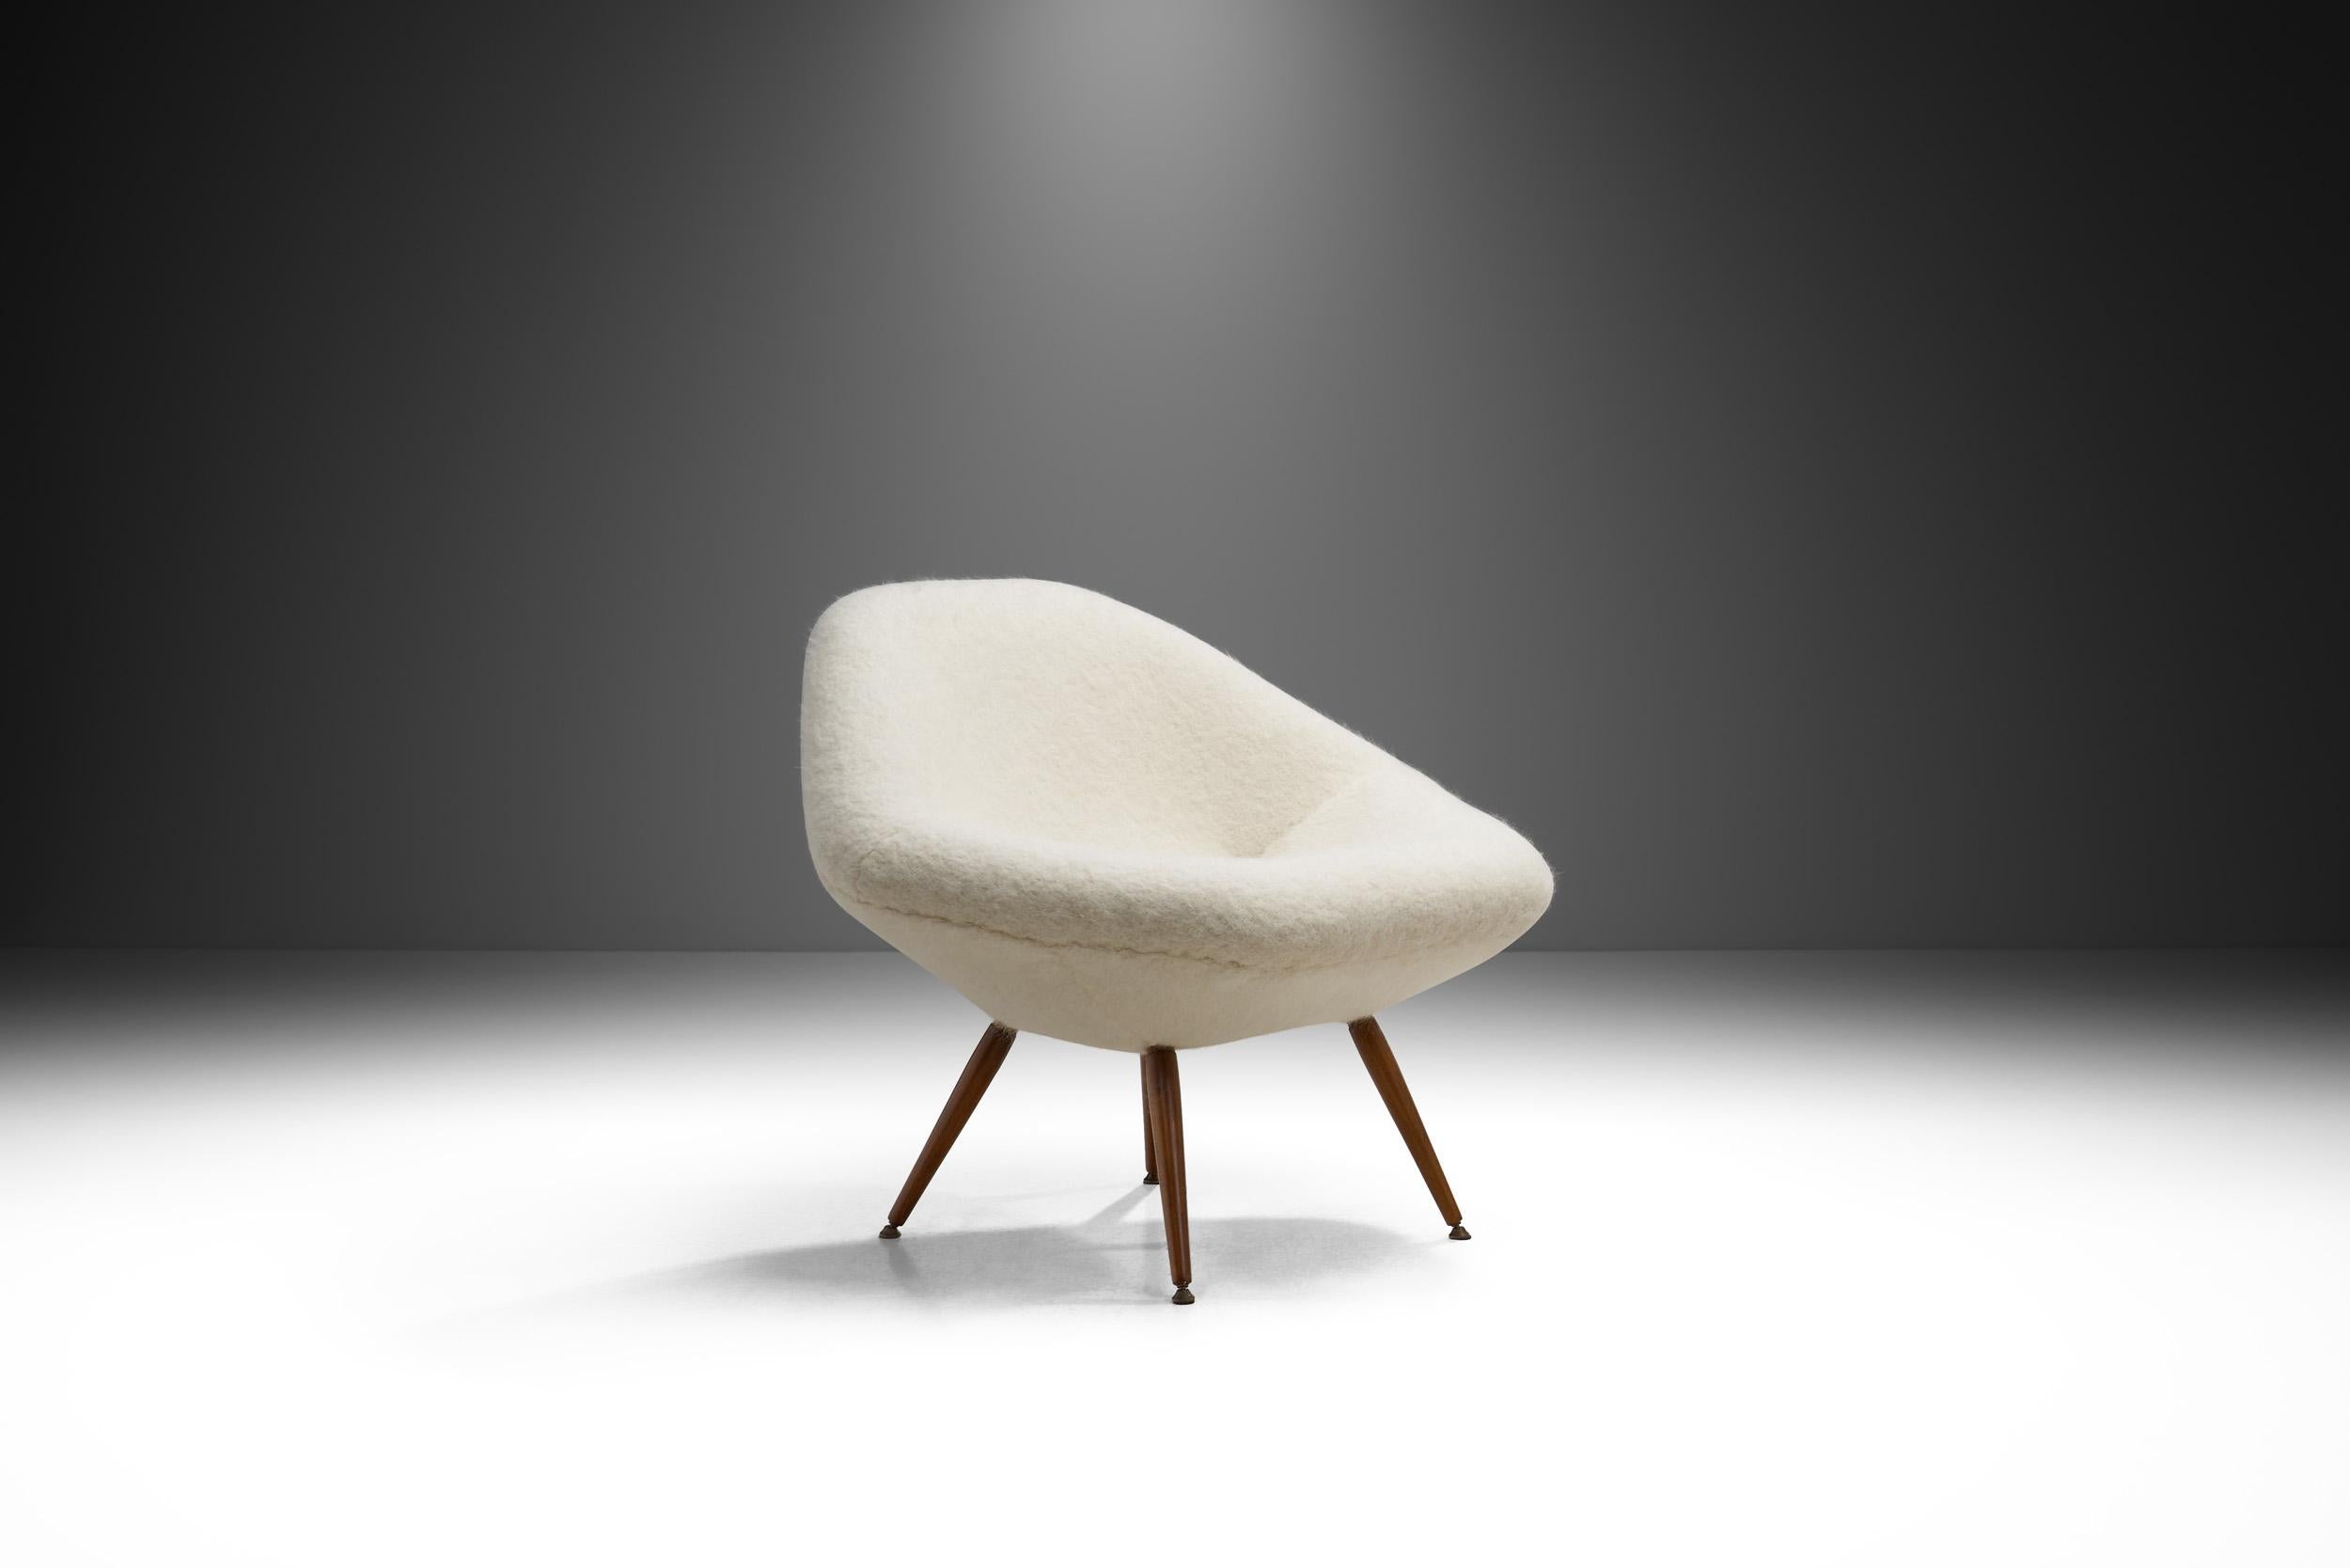 Swedish furniture design is a modernist story of enduring style. With its elegant shell shape, this lounge chair embodies the timeless appeal of Swedish furniture that was set in the past, by a cluster of iconic designers, but which continues to